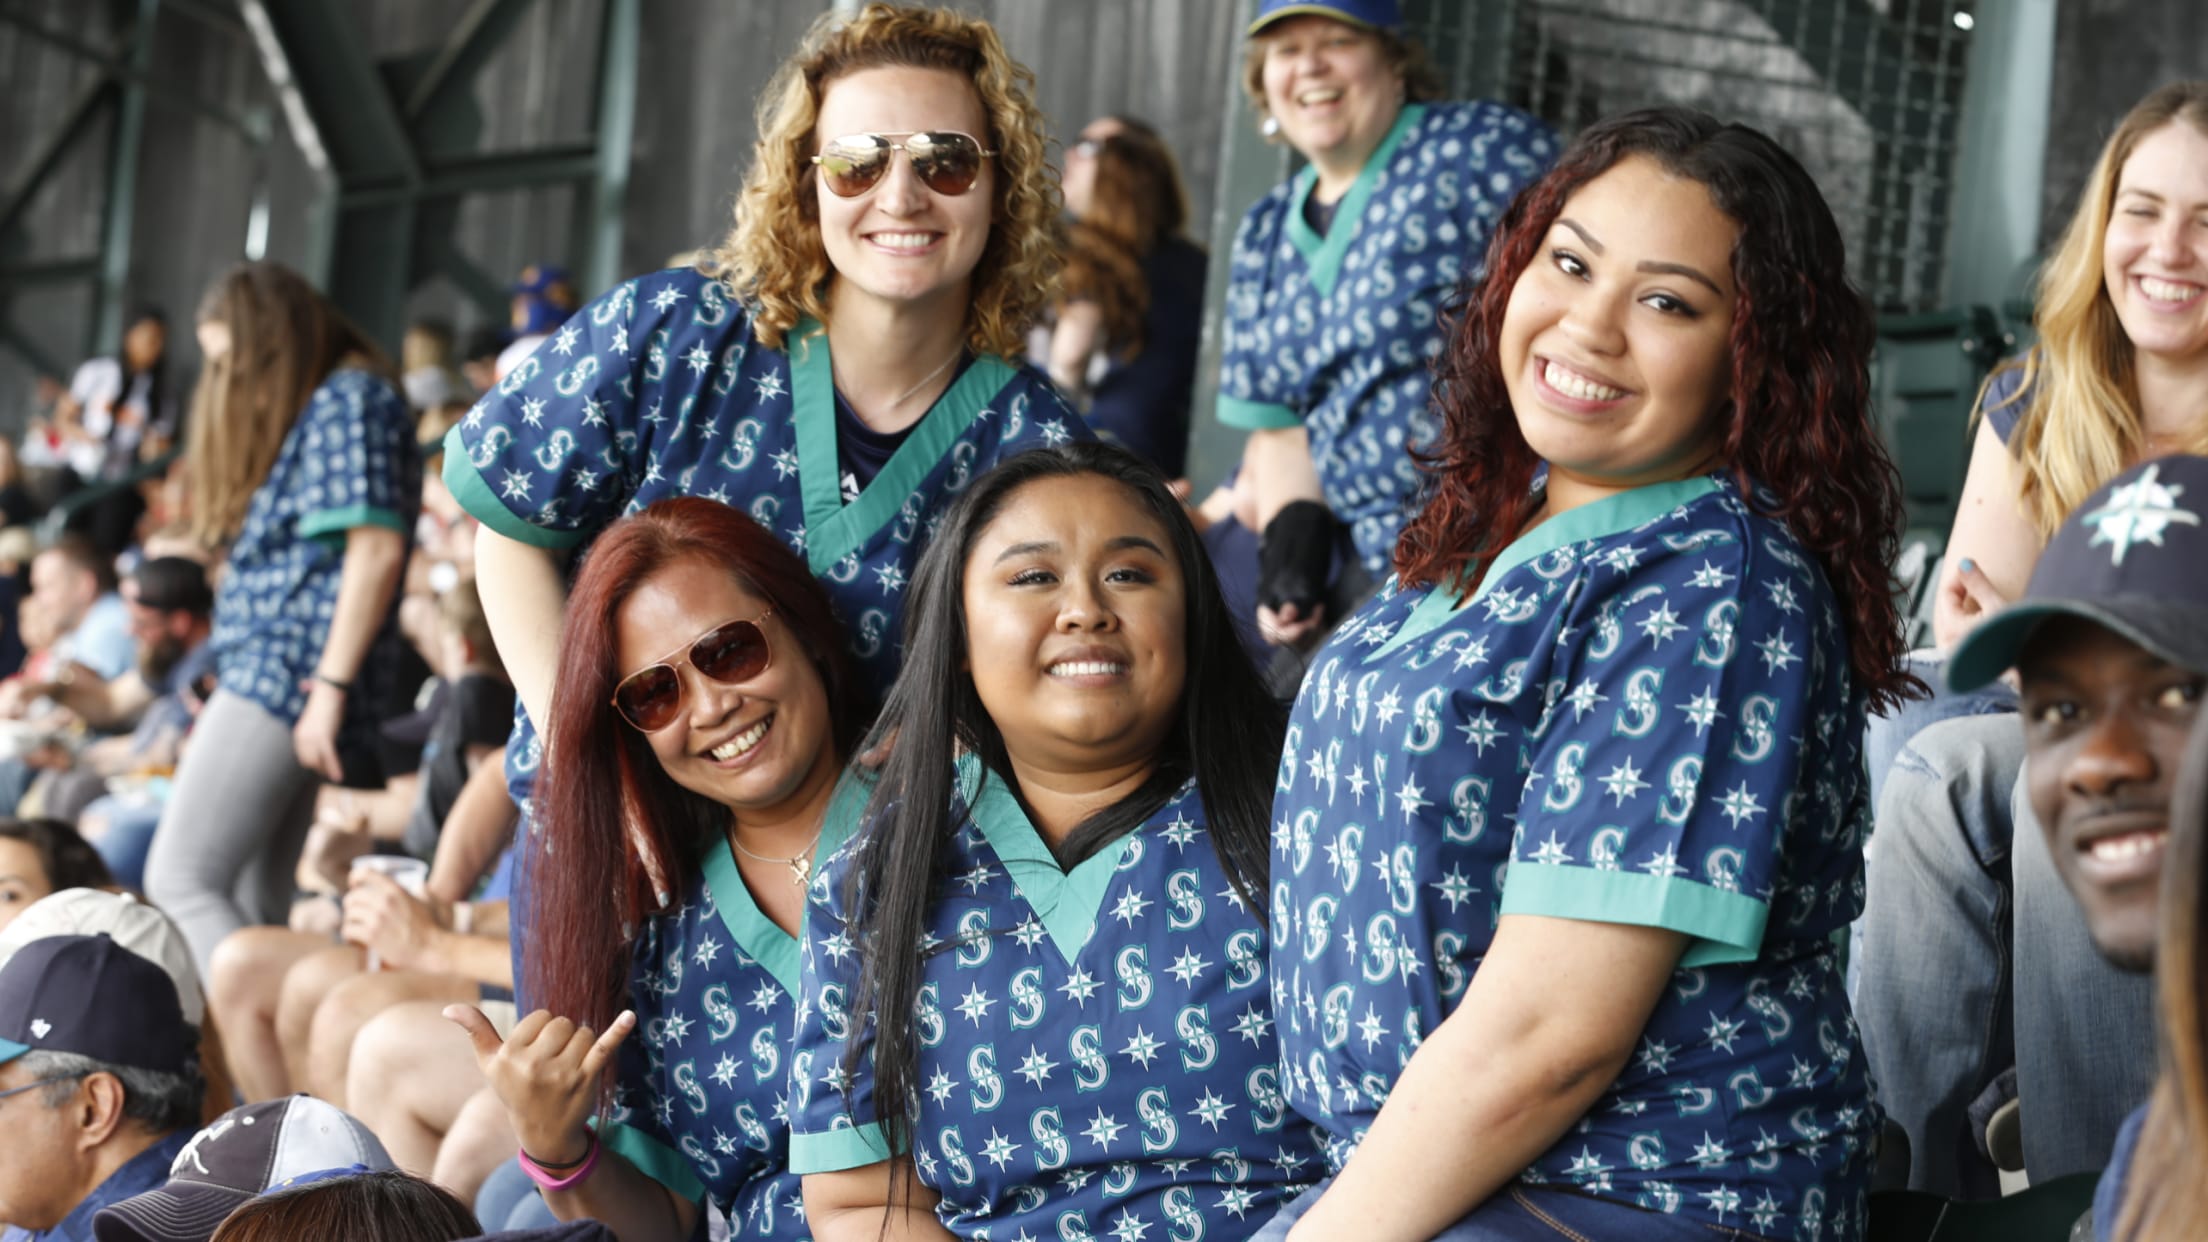 Seattle Mariners - THE 2023 PROMO SCHEDULE IS HERE! Which giveaway are you  most excited for?? 🔗 Mariners.com/Promotions